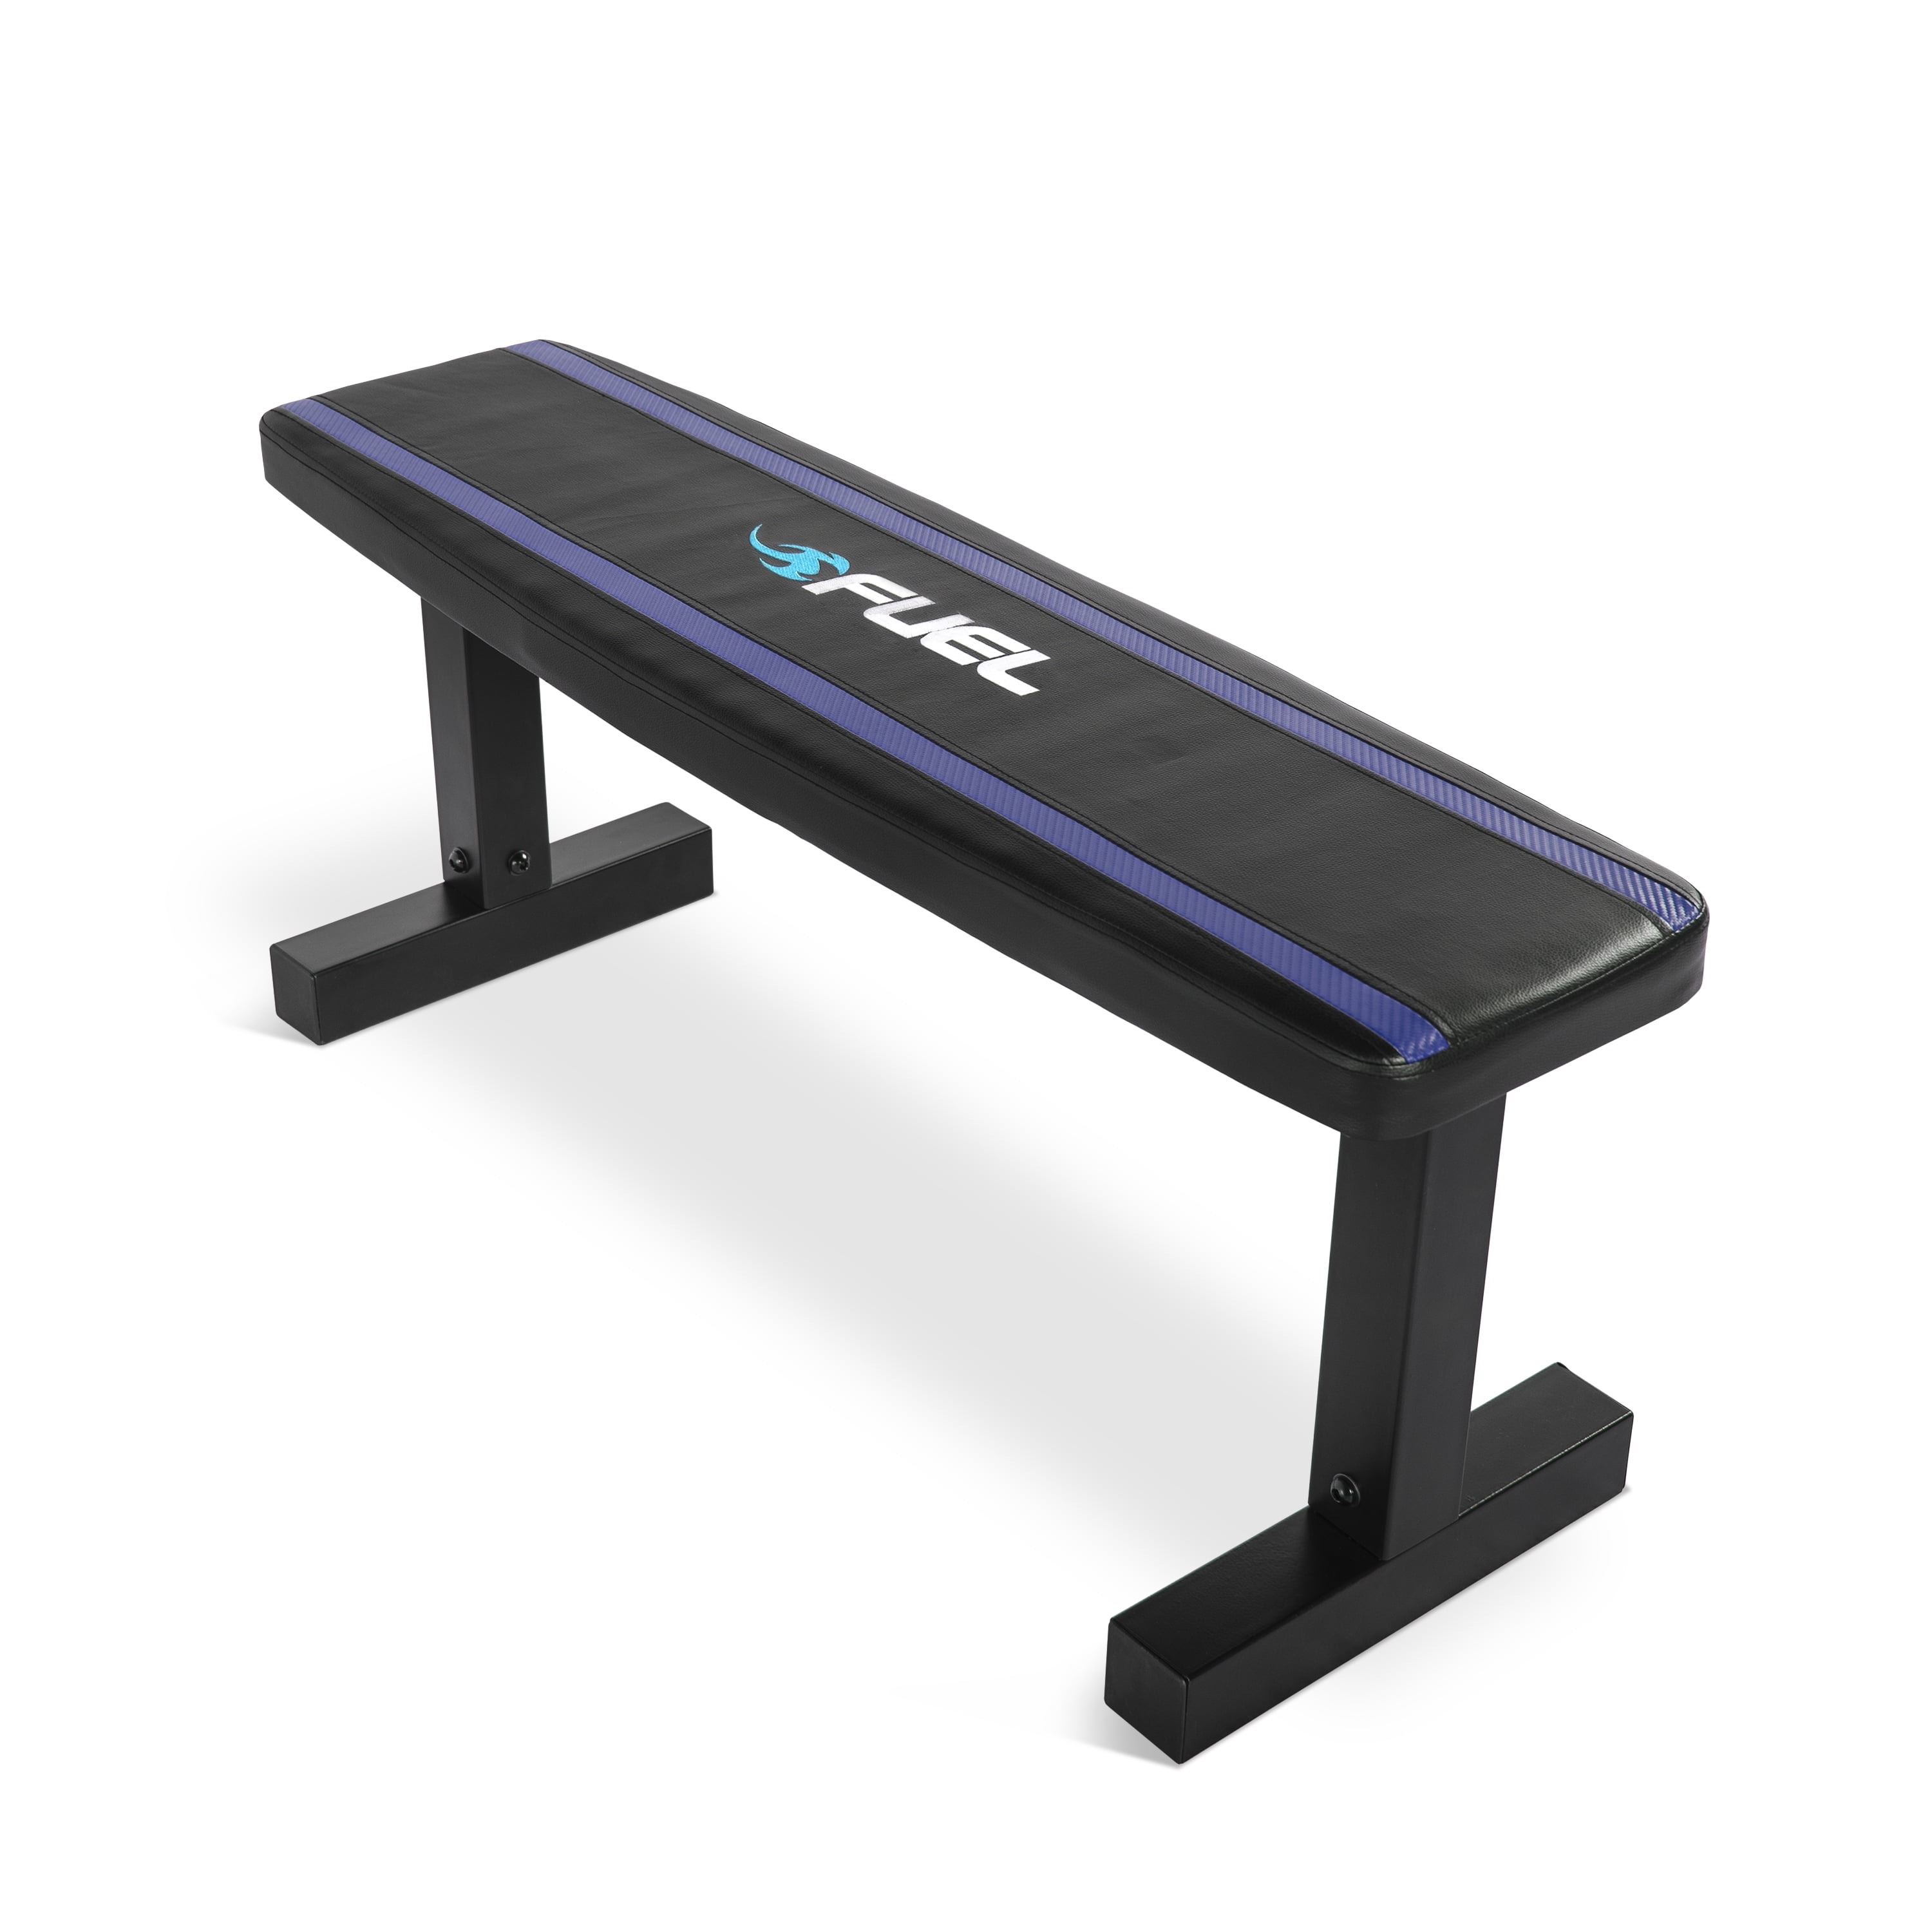 Weider WEBE39317 Strength Flat Weight Bench with Sewn Vinyl Seats for sale online 